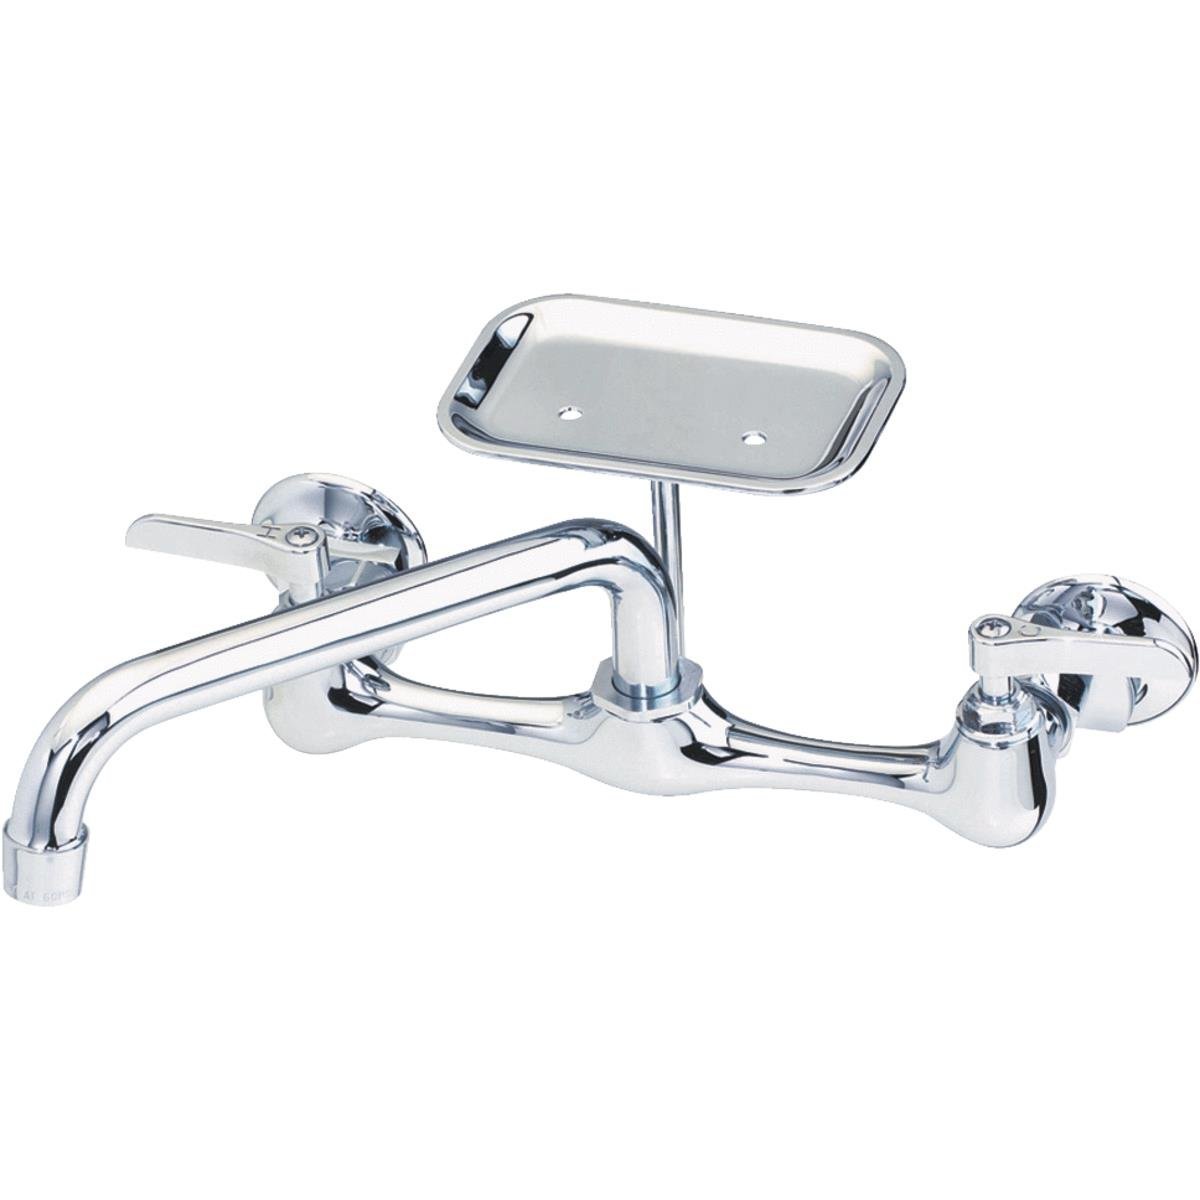 123-011nl Utility Faucet Wallmount With Soap Dish, Chrome